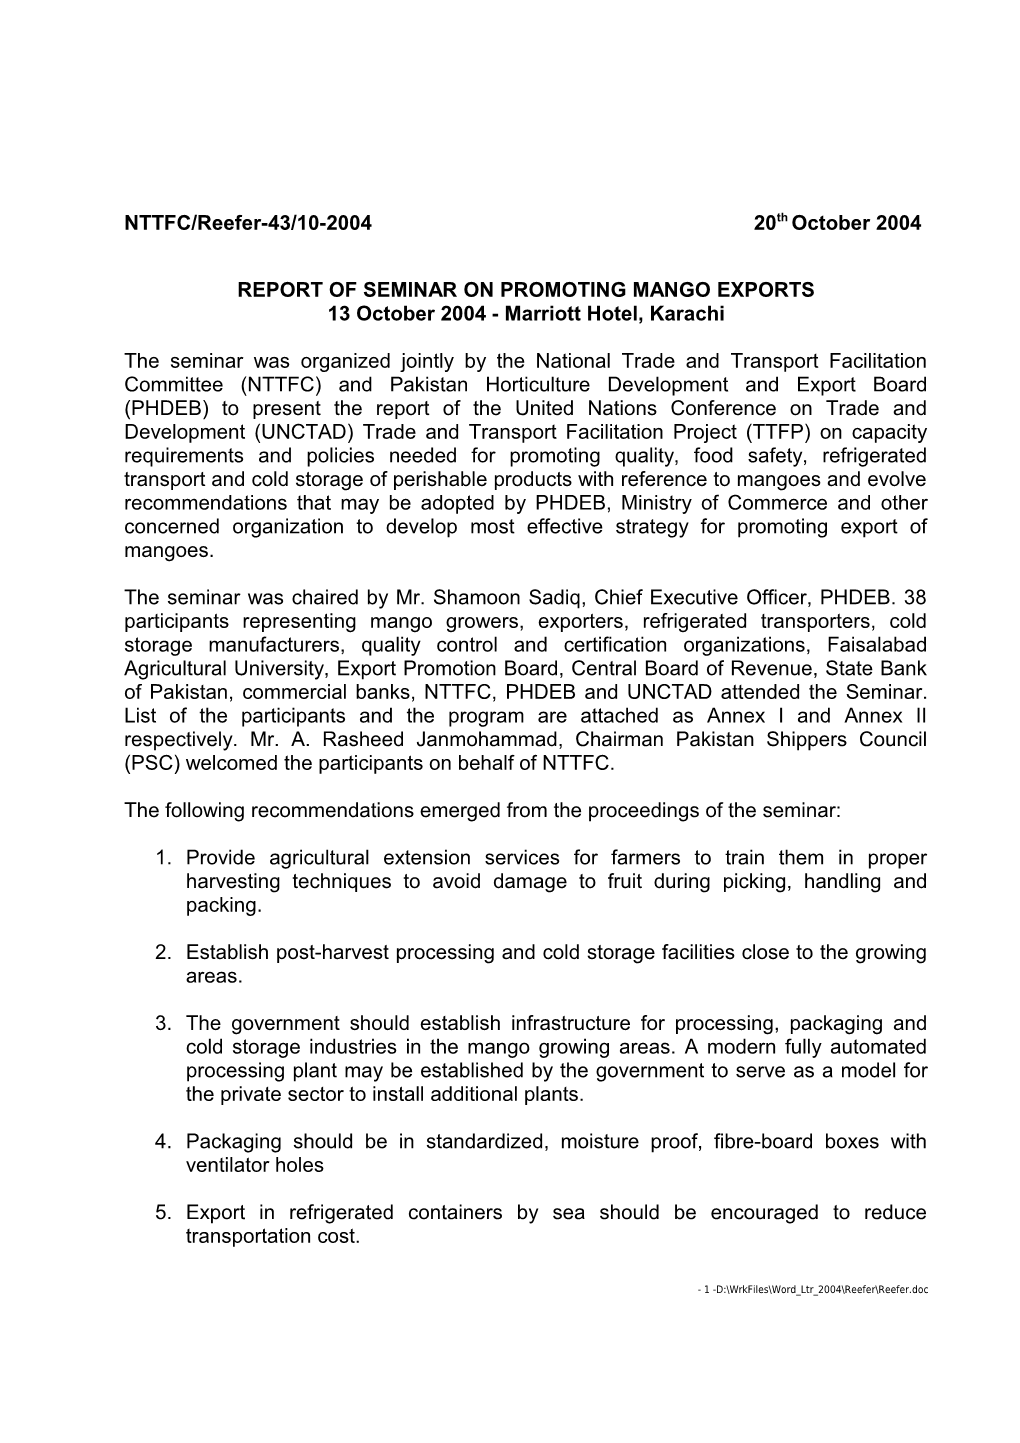 Report of Seminar on Promoting Mango Exports